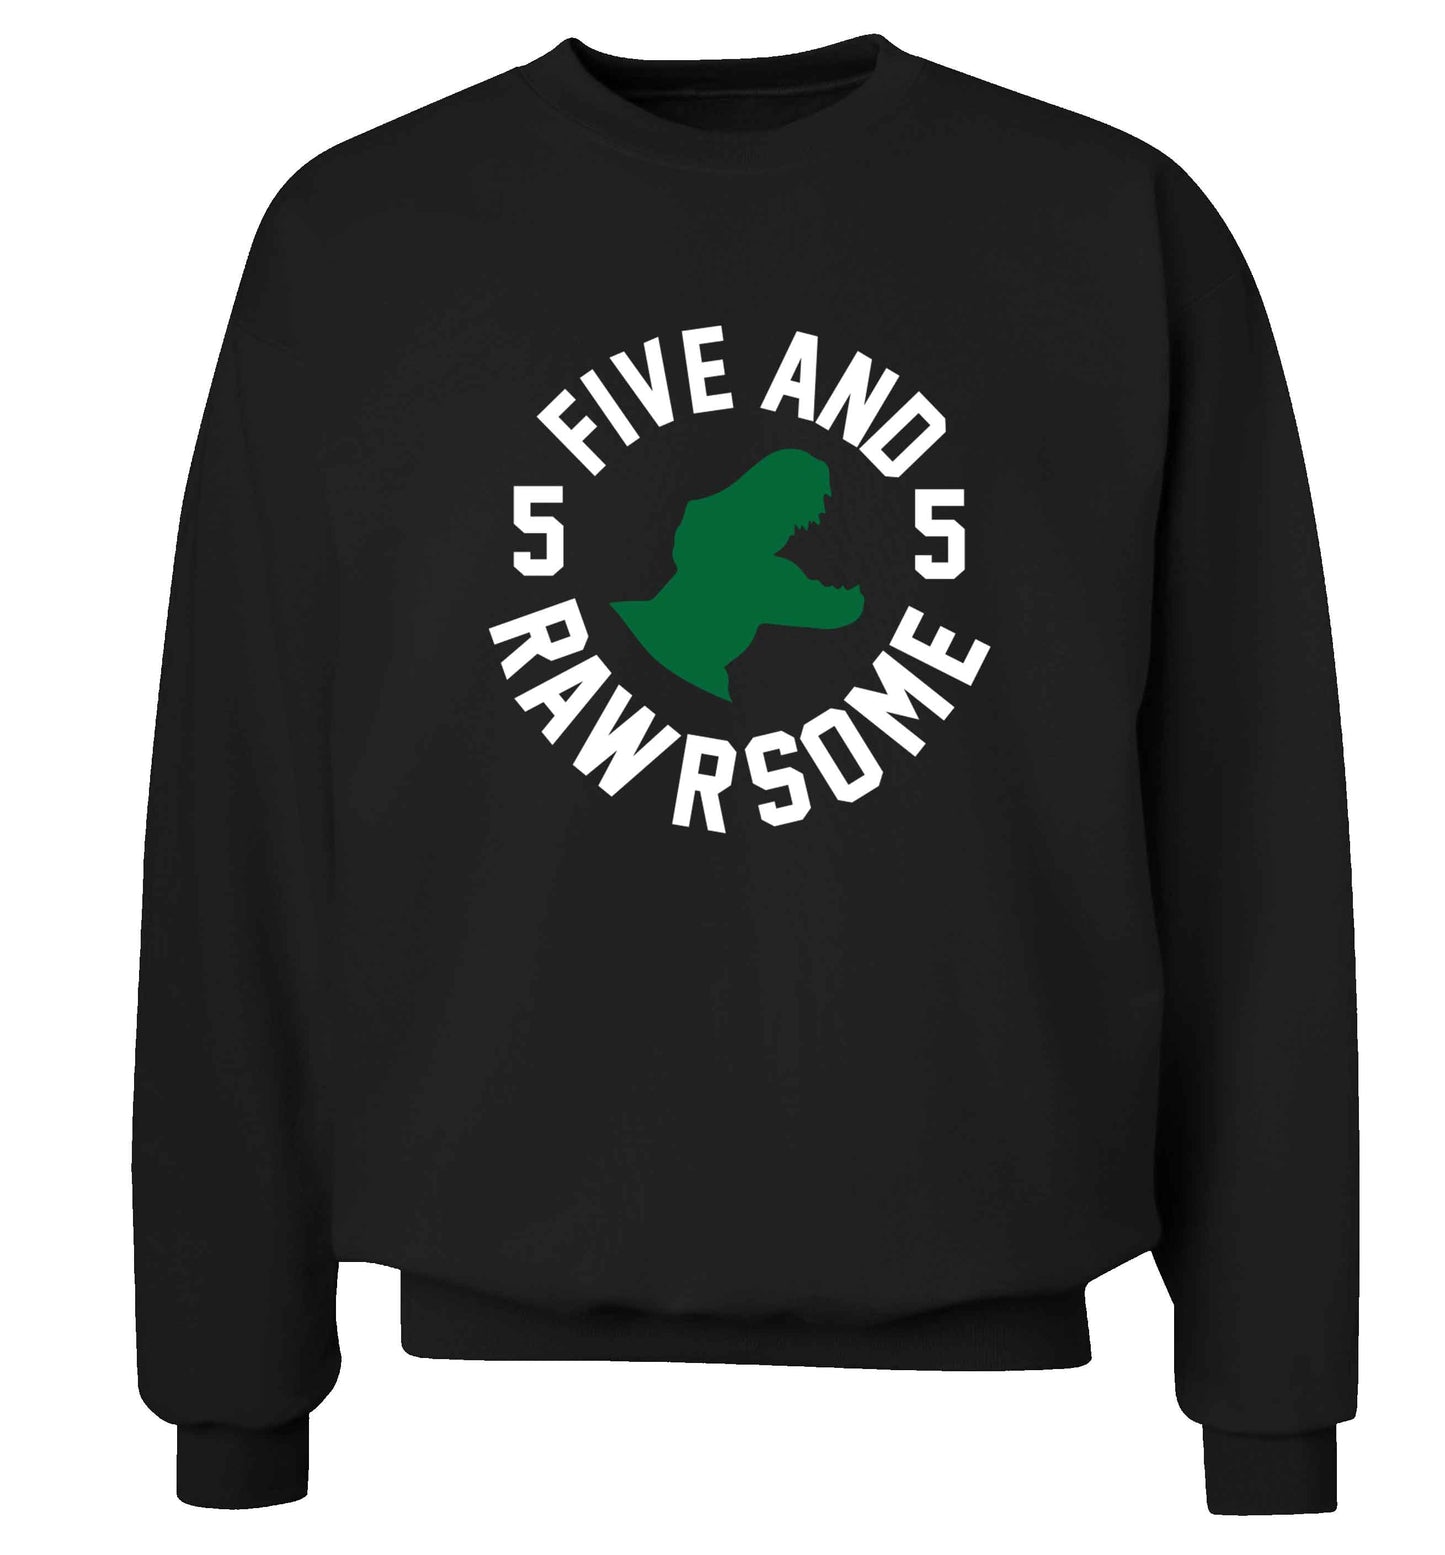 Five and rawrsome adult's unisex black sweater 2XL